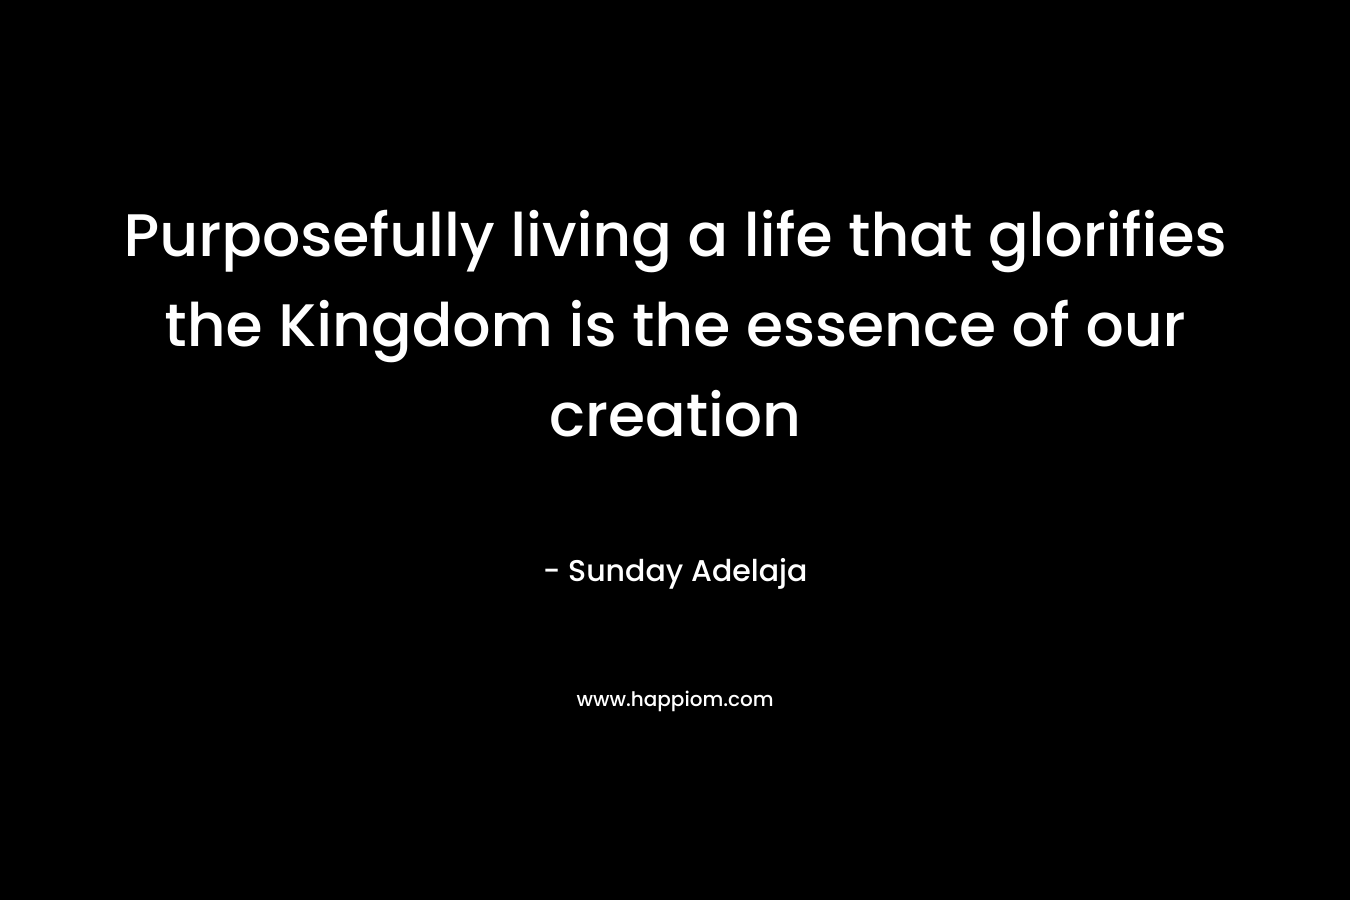 Purposefully living a life that glorifies the Kingdom is the essence of our creation